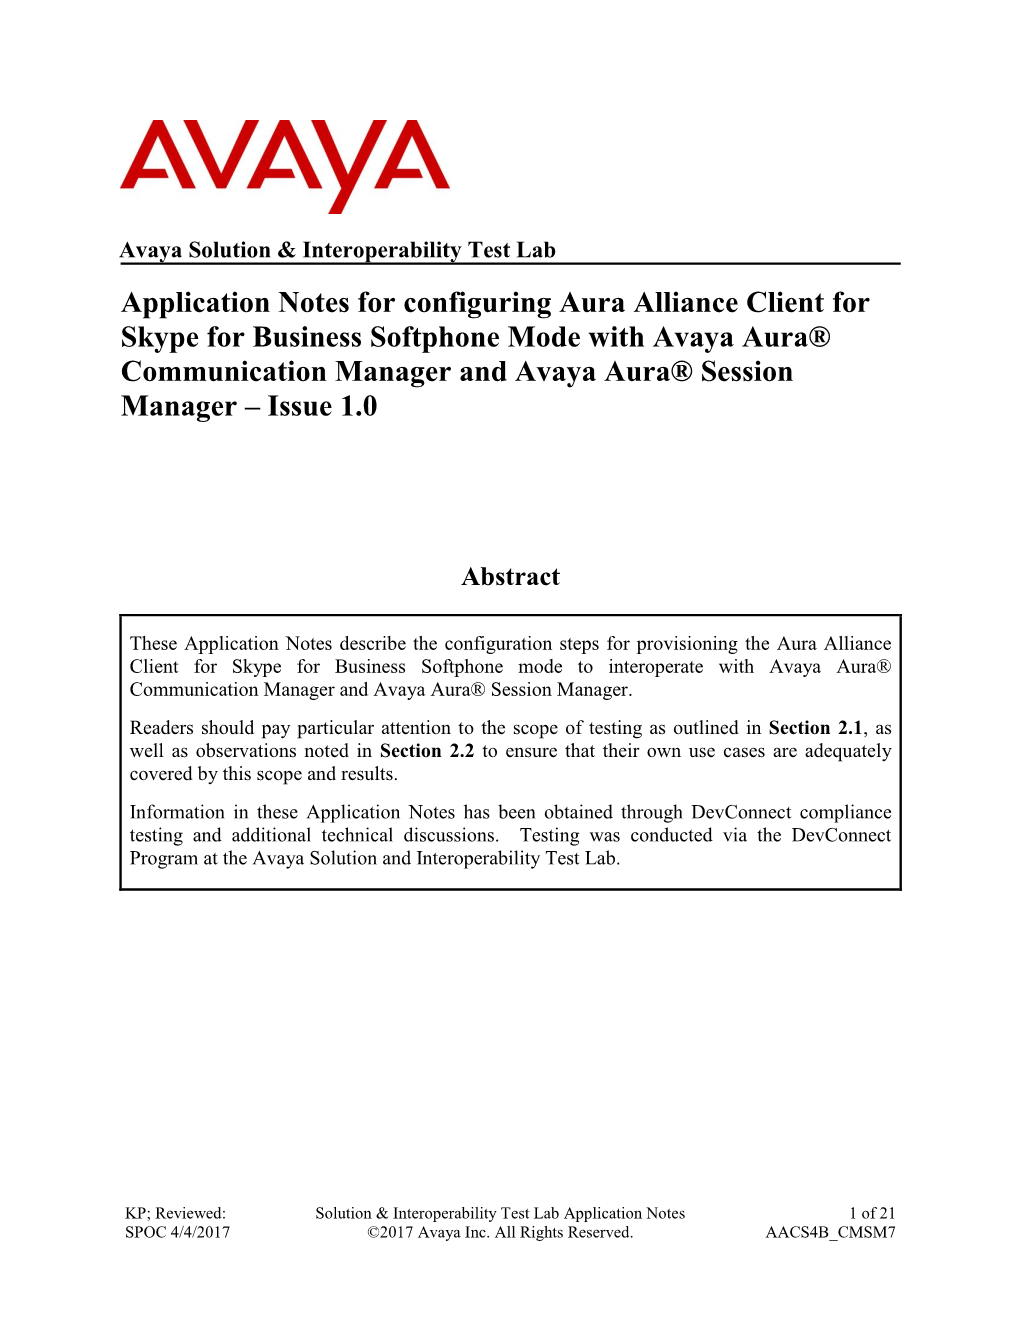 Aura Alliance Client for Skype for Business Softphone Mode with Avaya Aura® Communication Manager and Avaya Aura® Session Manager – Issue 1.0